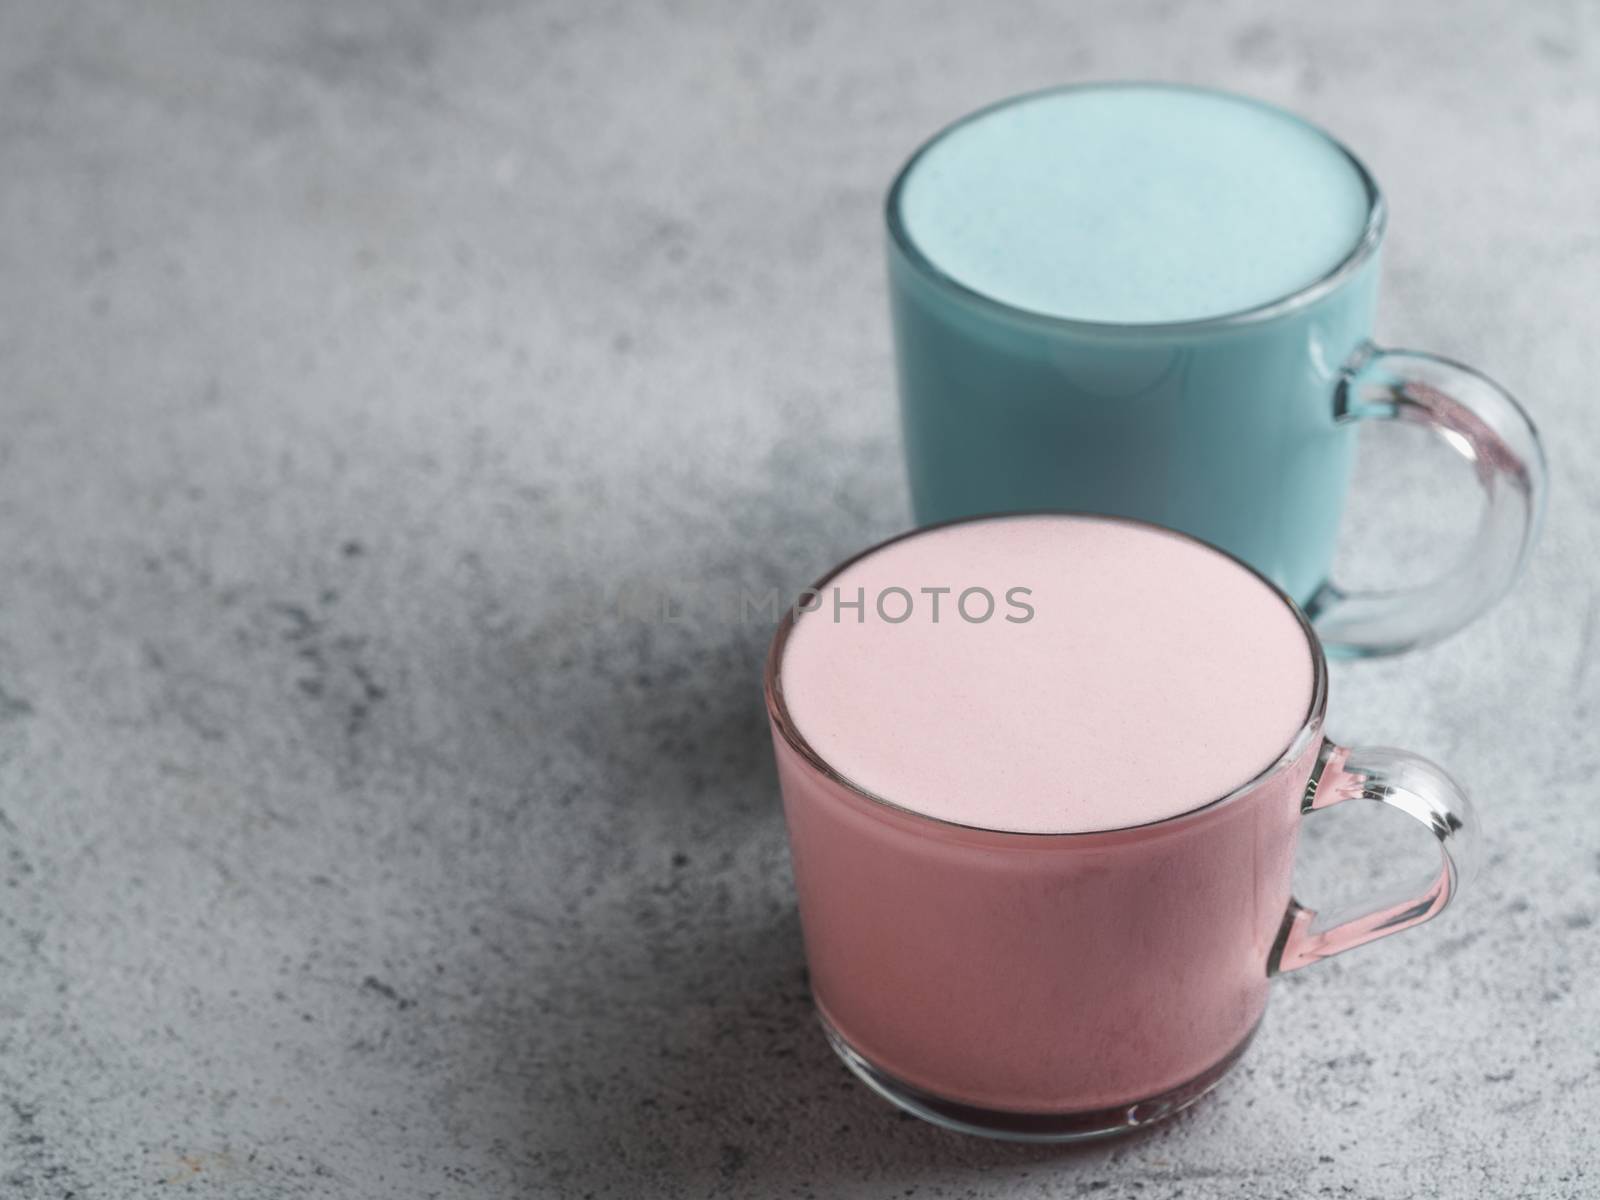 Trendy drink: Blue and pink latte. Top view of hot butterfly pea latte or blue spirulina latte and pink or raspberry beetroot latte on gray cement textured background. Copy space for text.